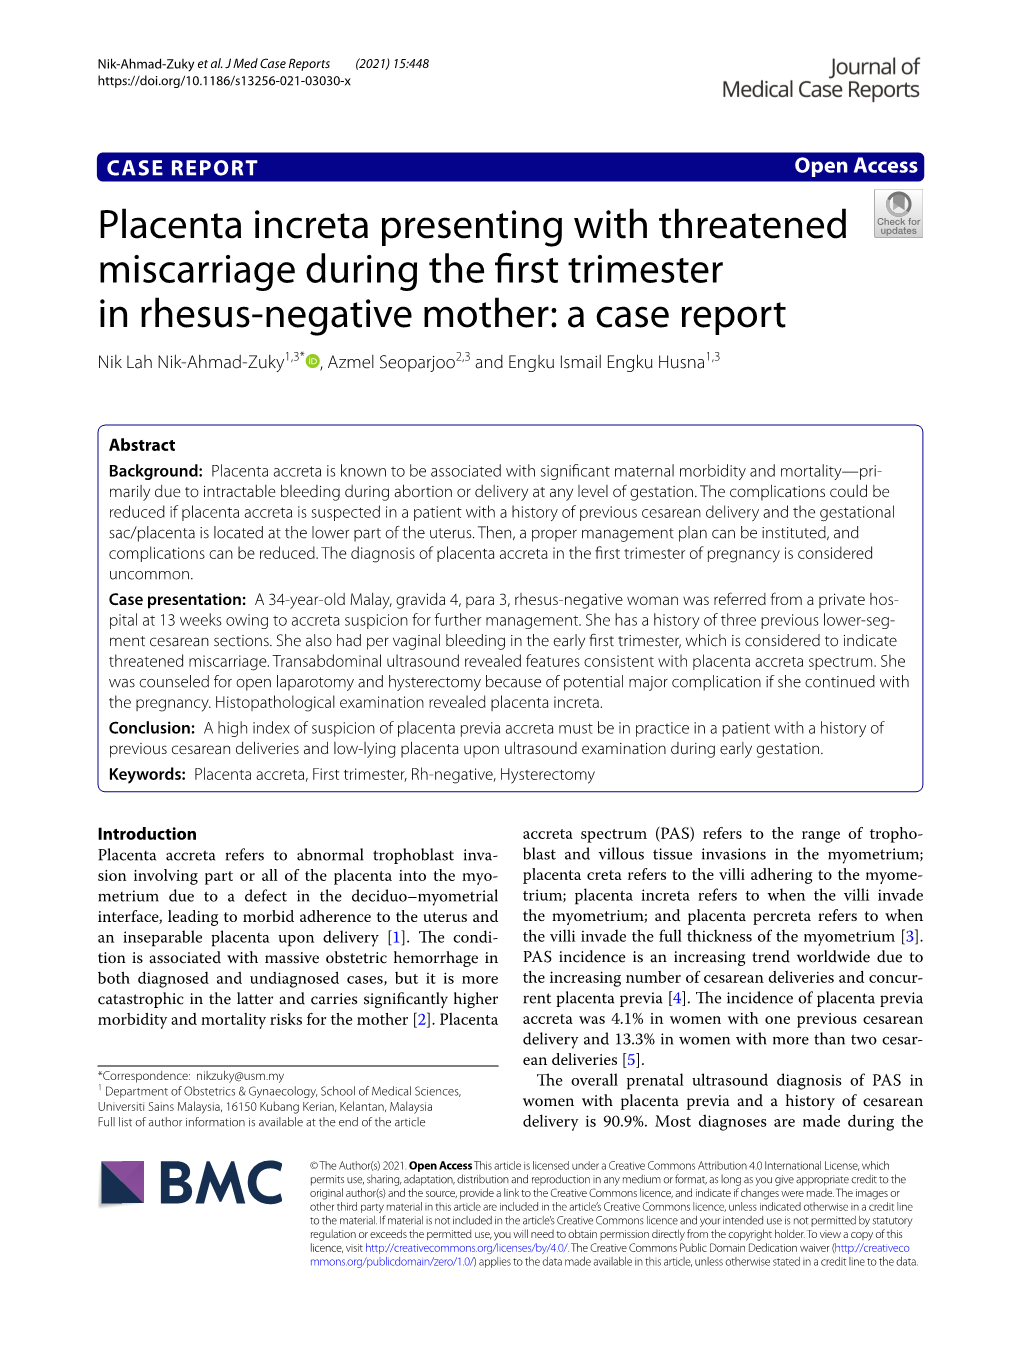 Placenta Increta Presenting with Threatened Miscarriage During The